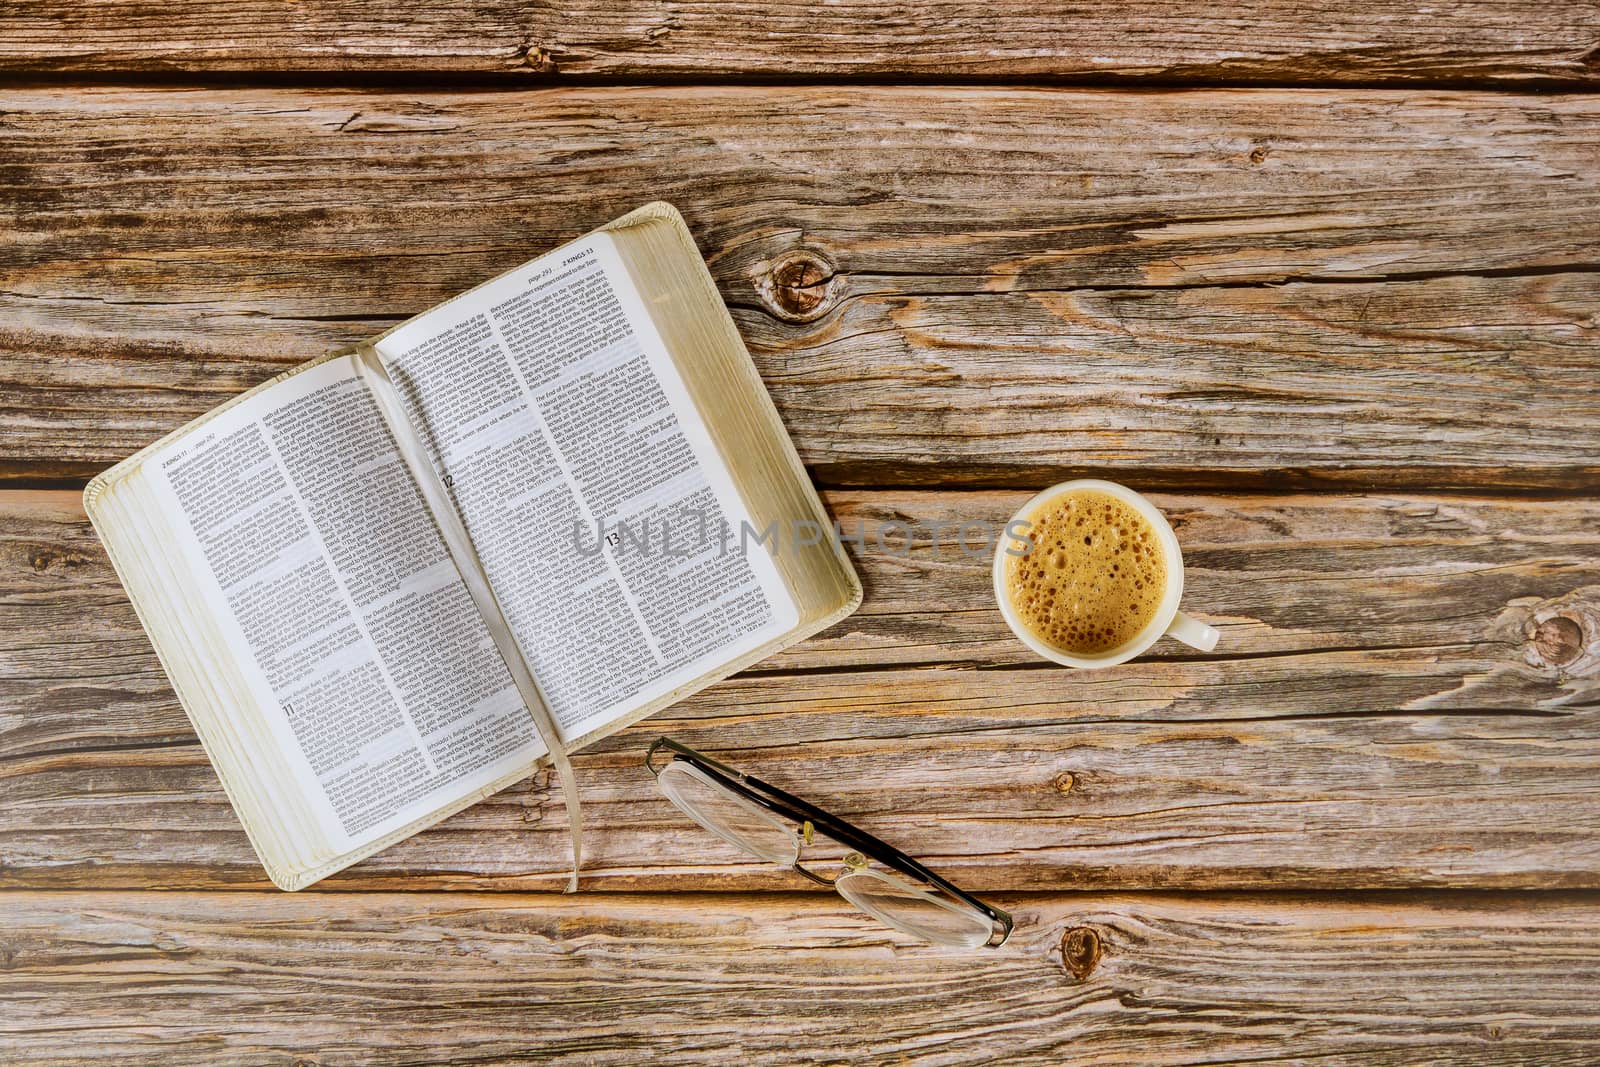 Los Angeles CA US 16 MAY 2020: Open Holy Bible morning readings on a table top with coffee cup and eyeglasses